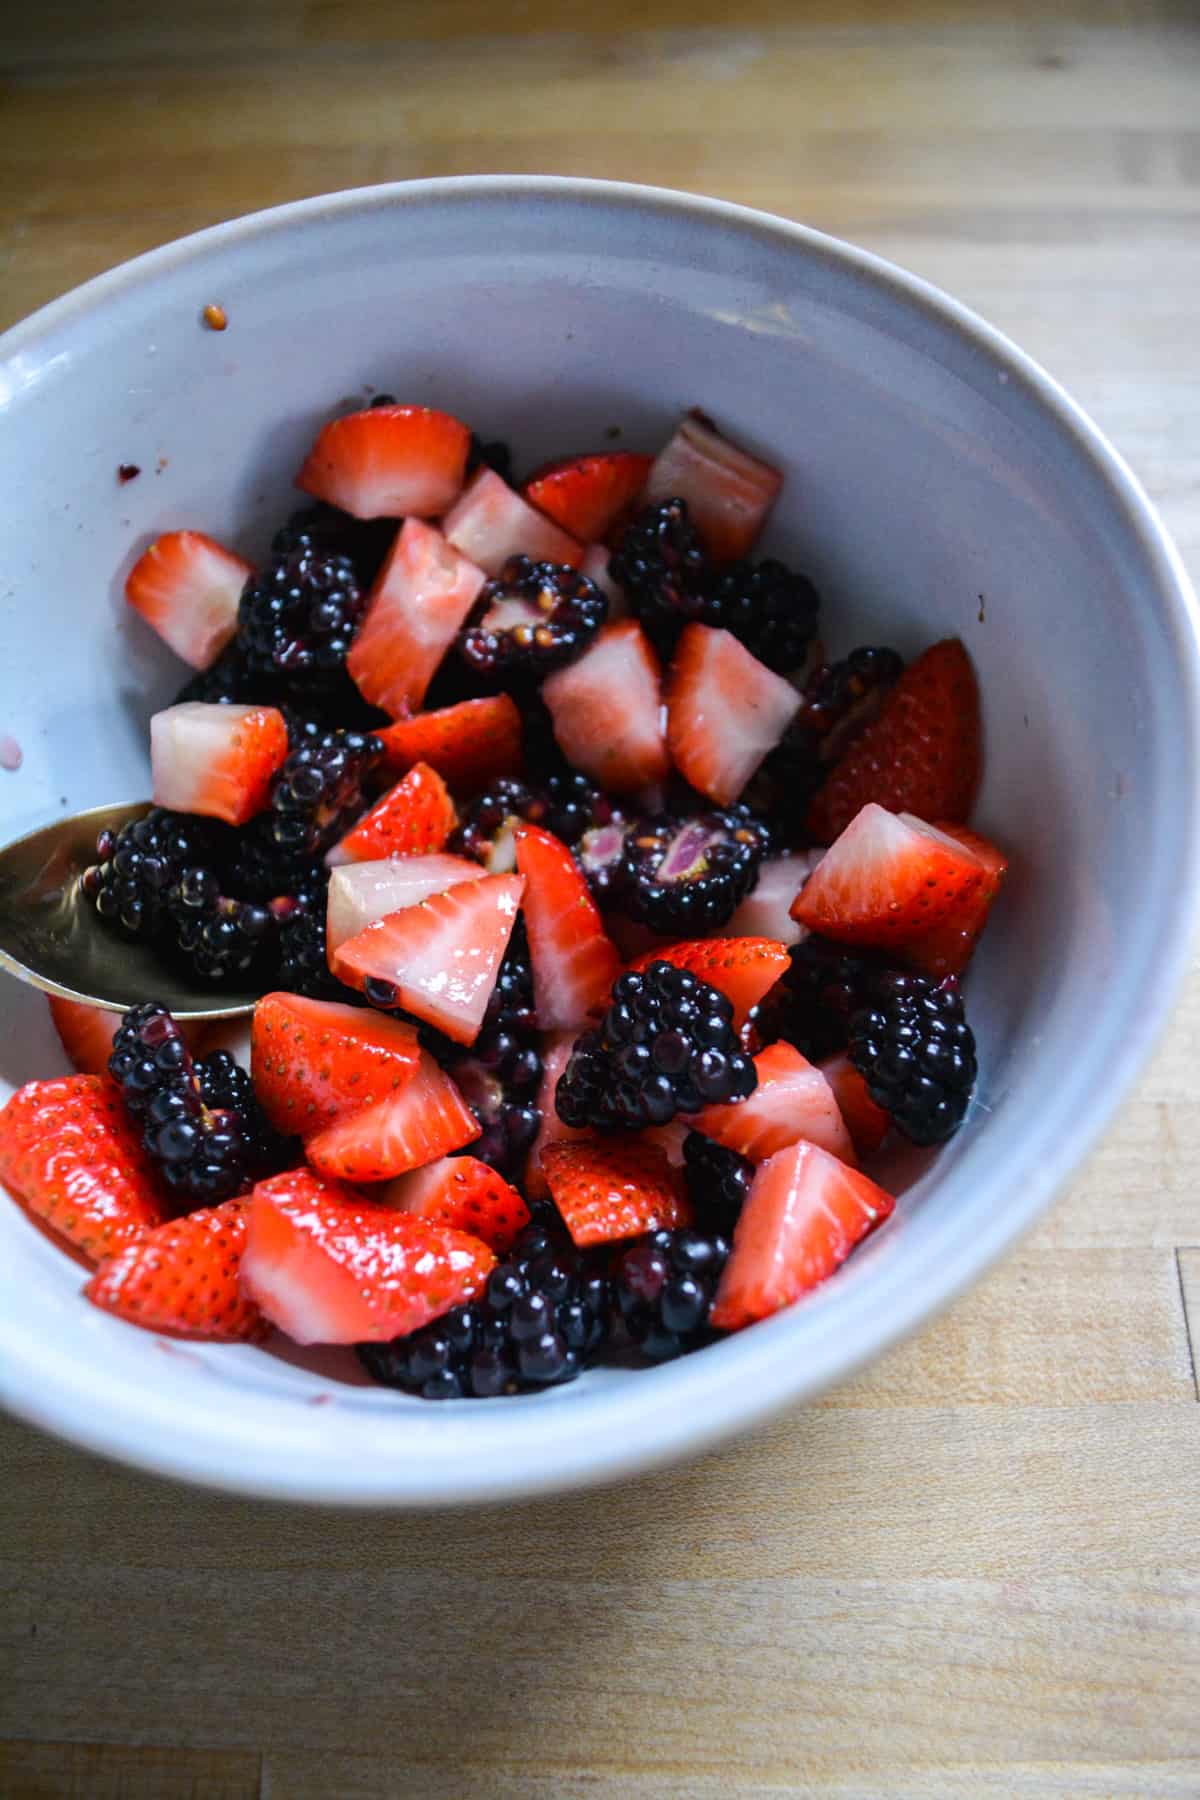 Macerated berries in a bowl